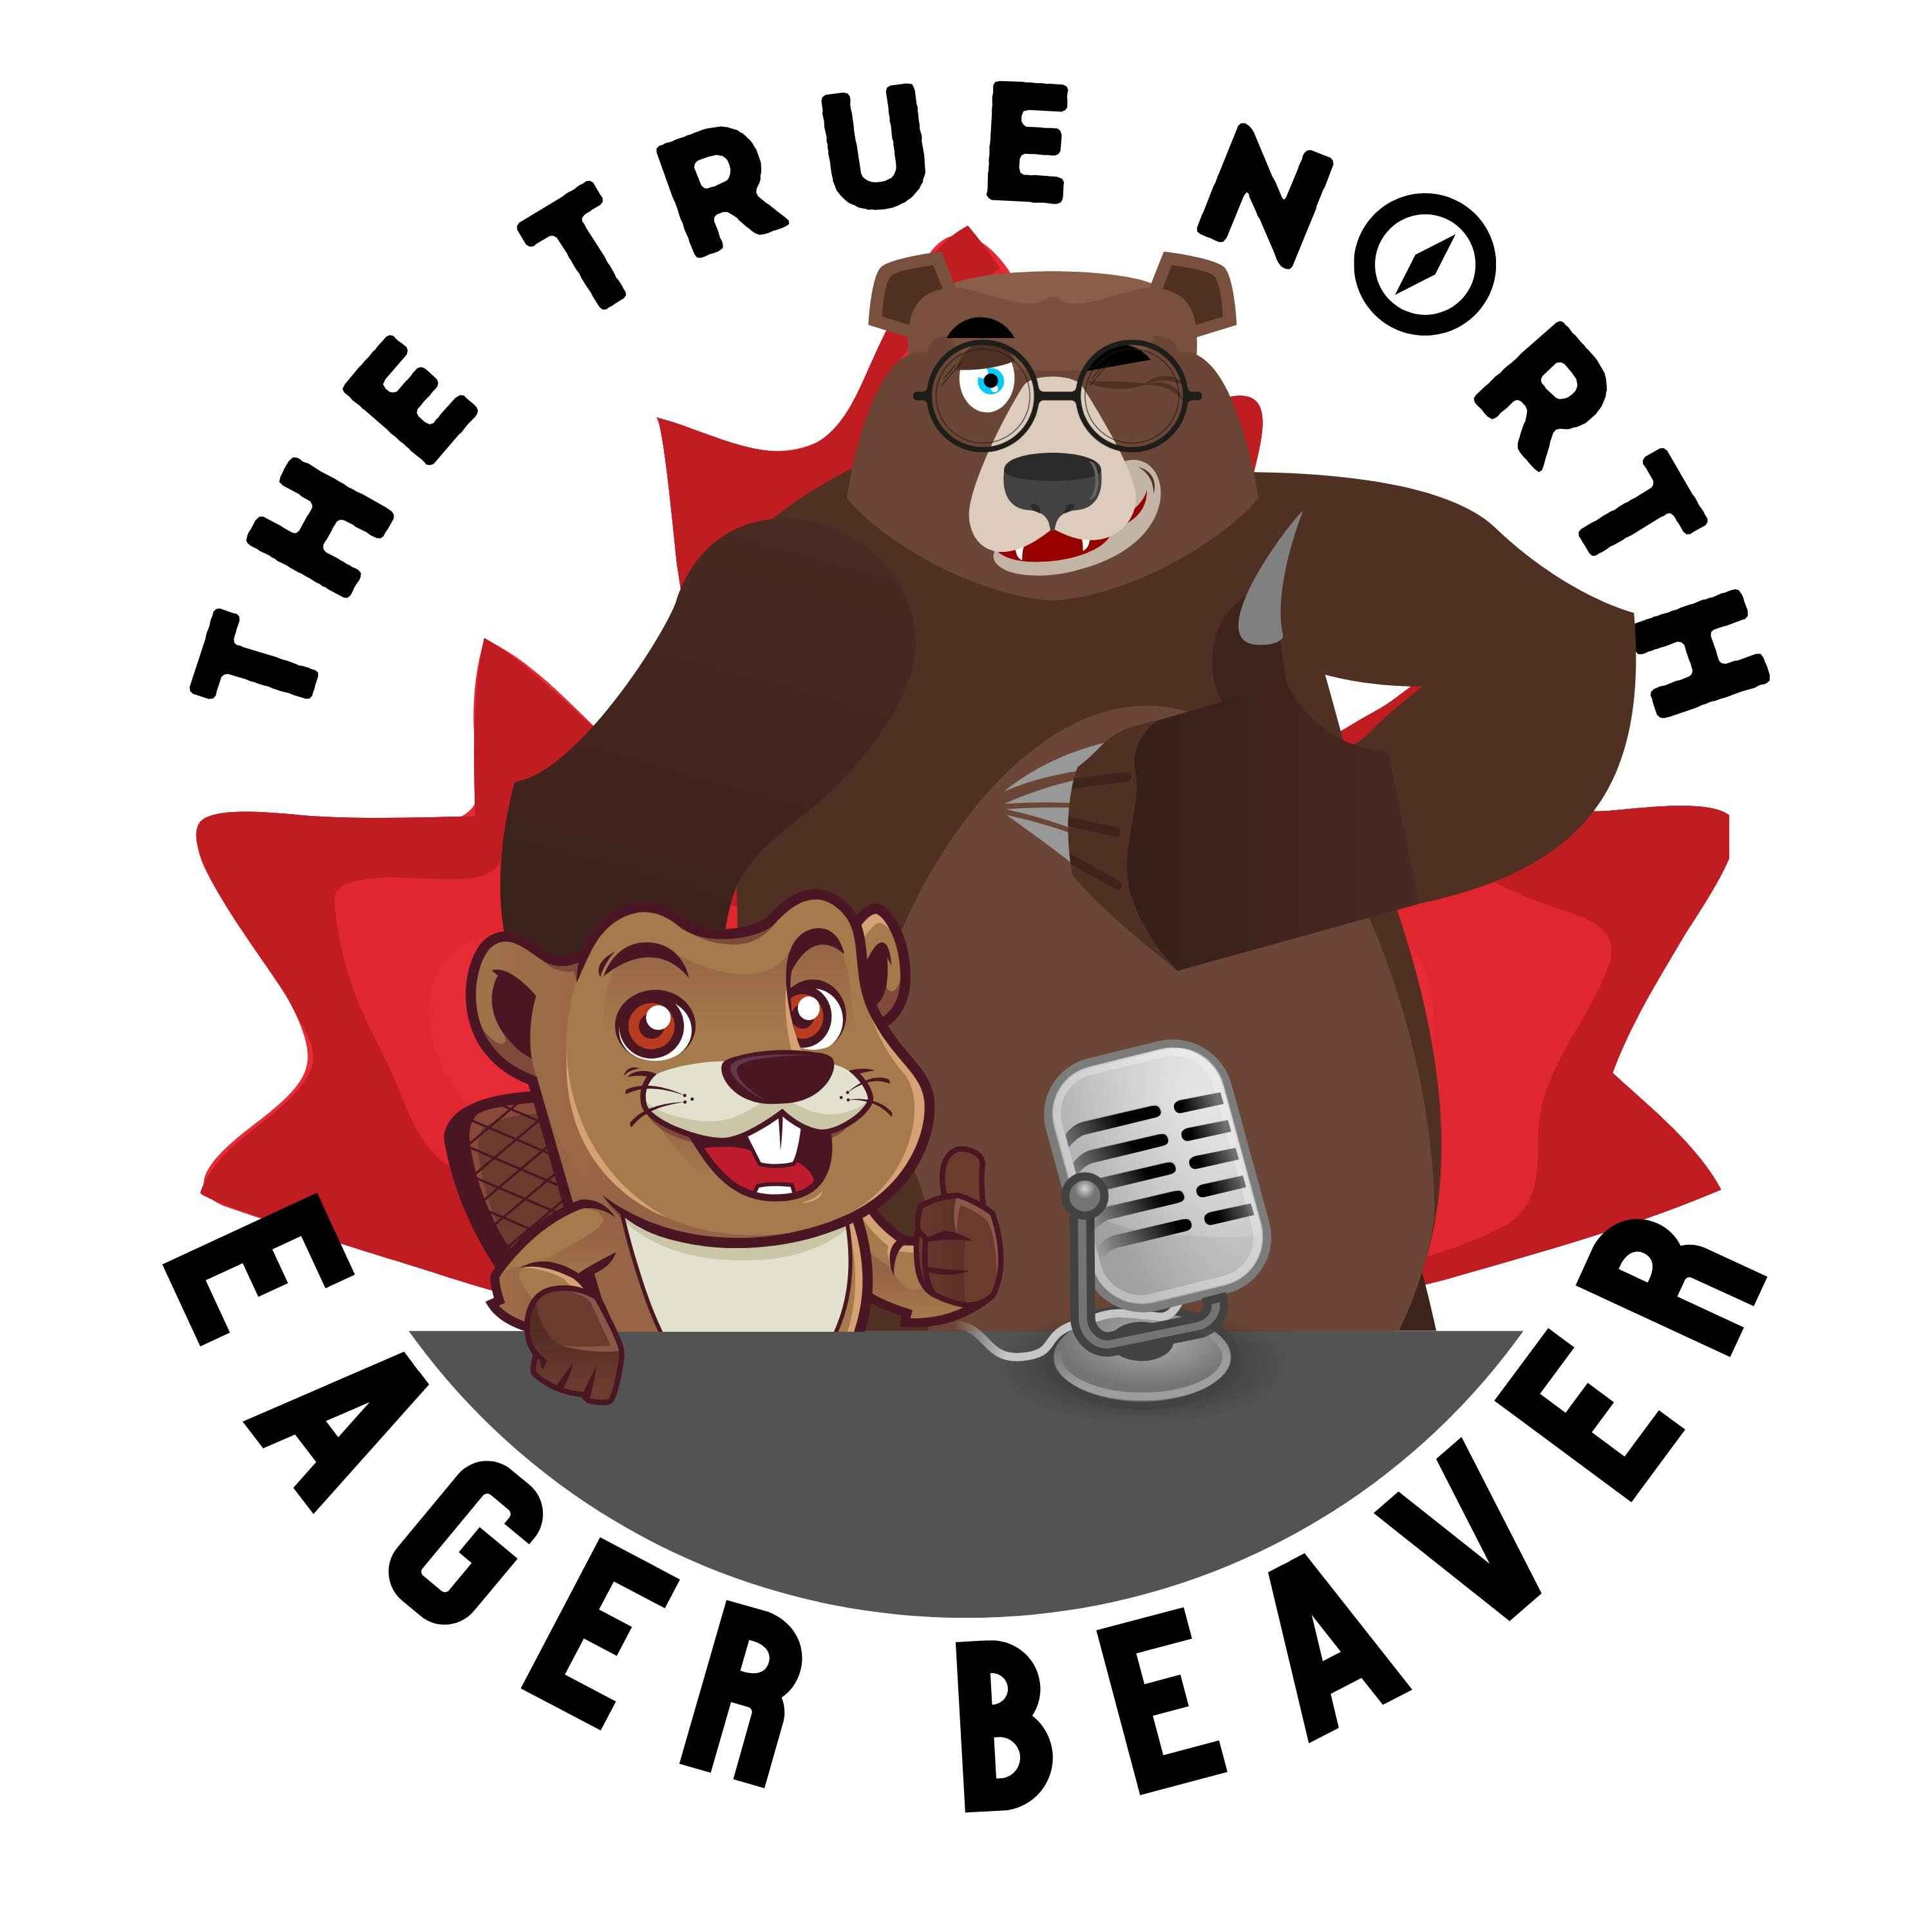 By-Elections — The Daily Beaver Morning Show